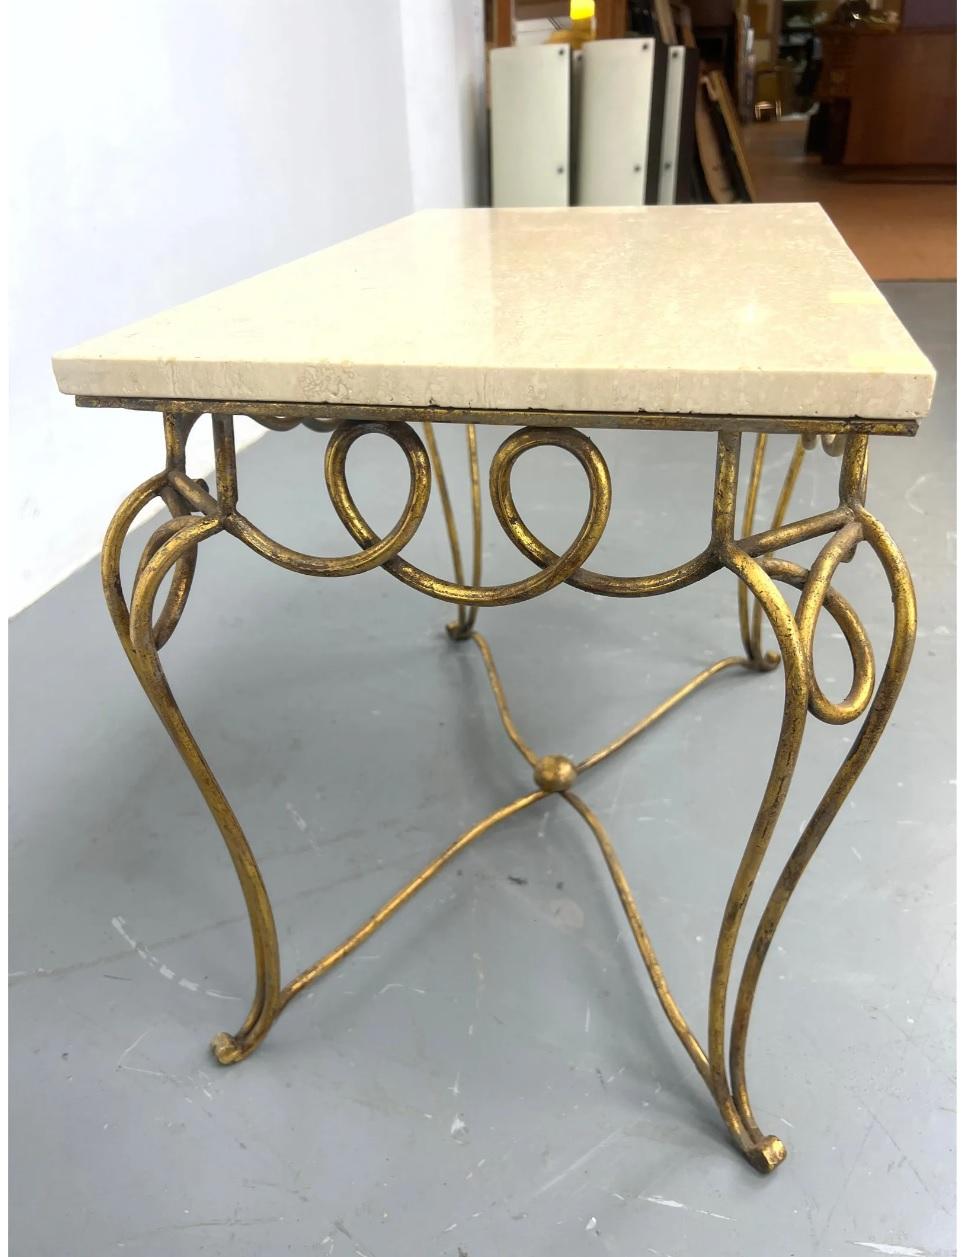 Midcentury French Rene Prou Art Deco Gilded Iron End Tables with Travertine Tops For Sale 3